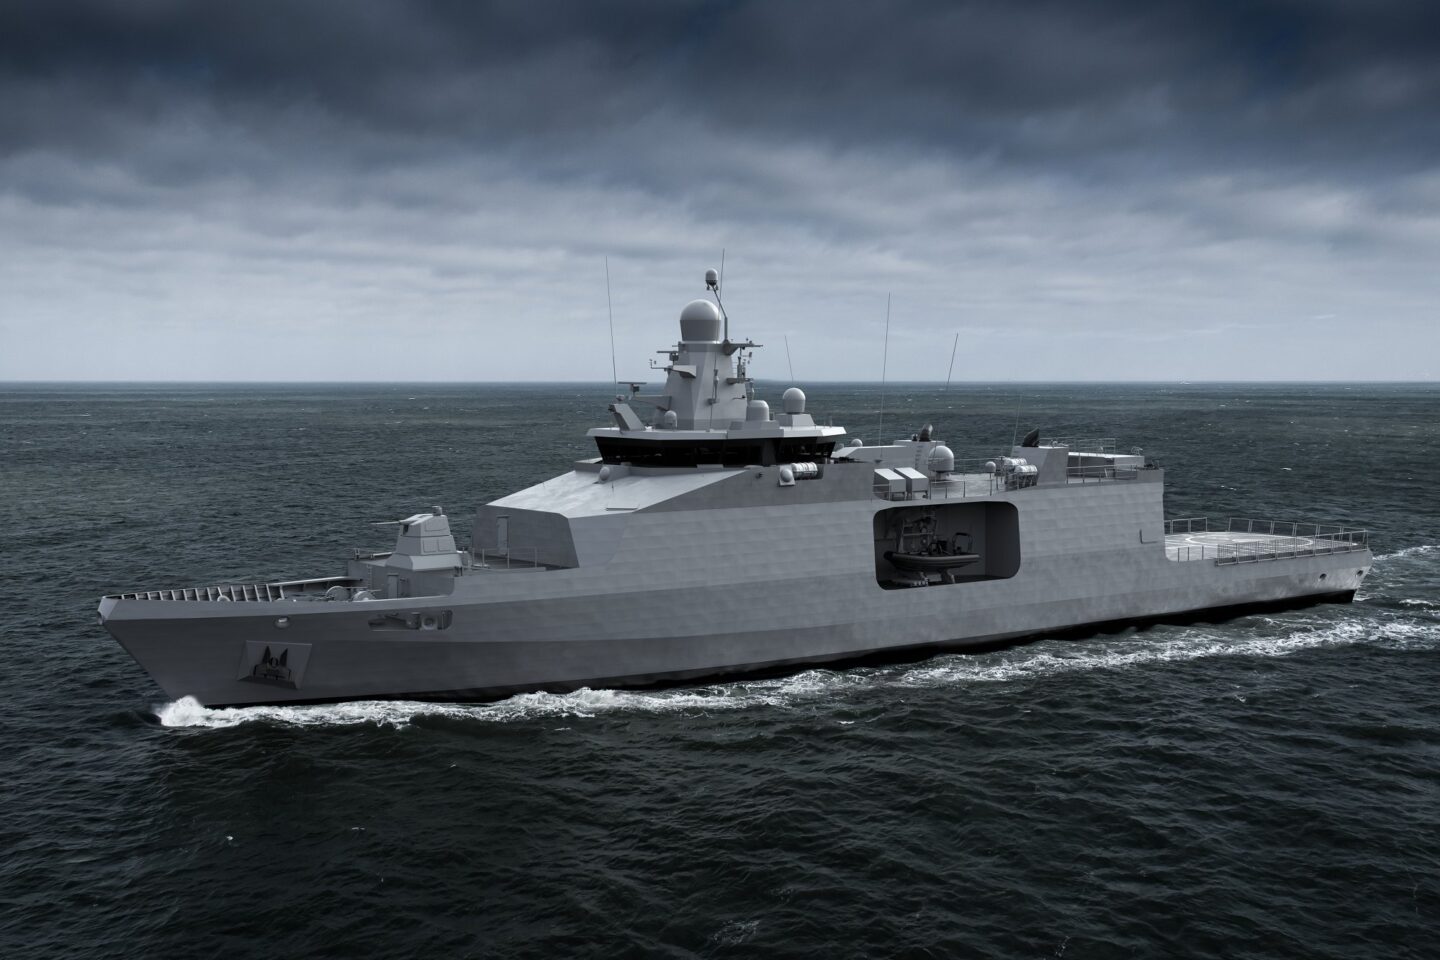 French Directorate General of Armament Awards Contract for Seven Offshore Patrol Vessels